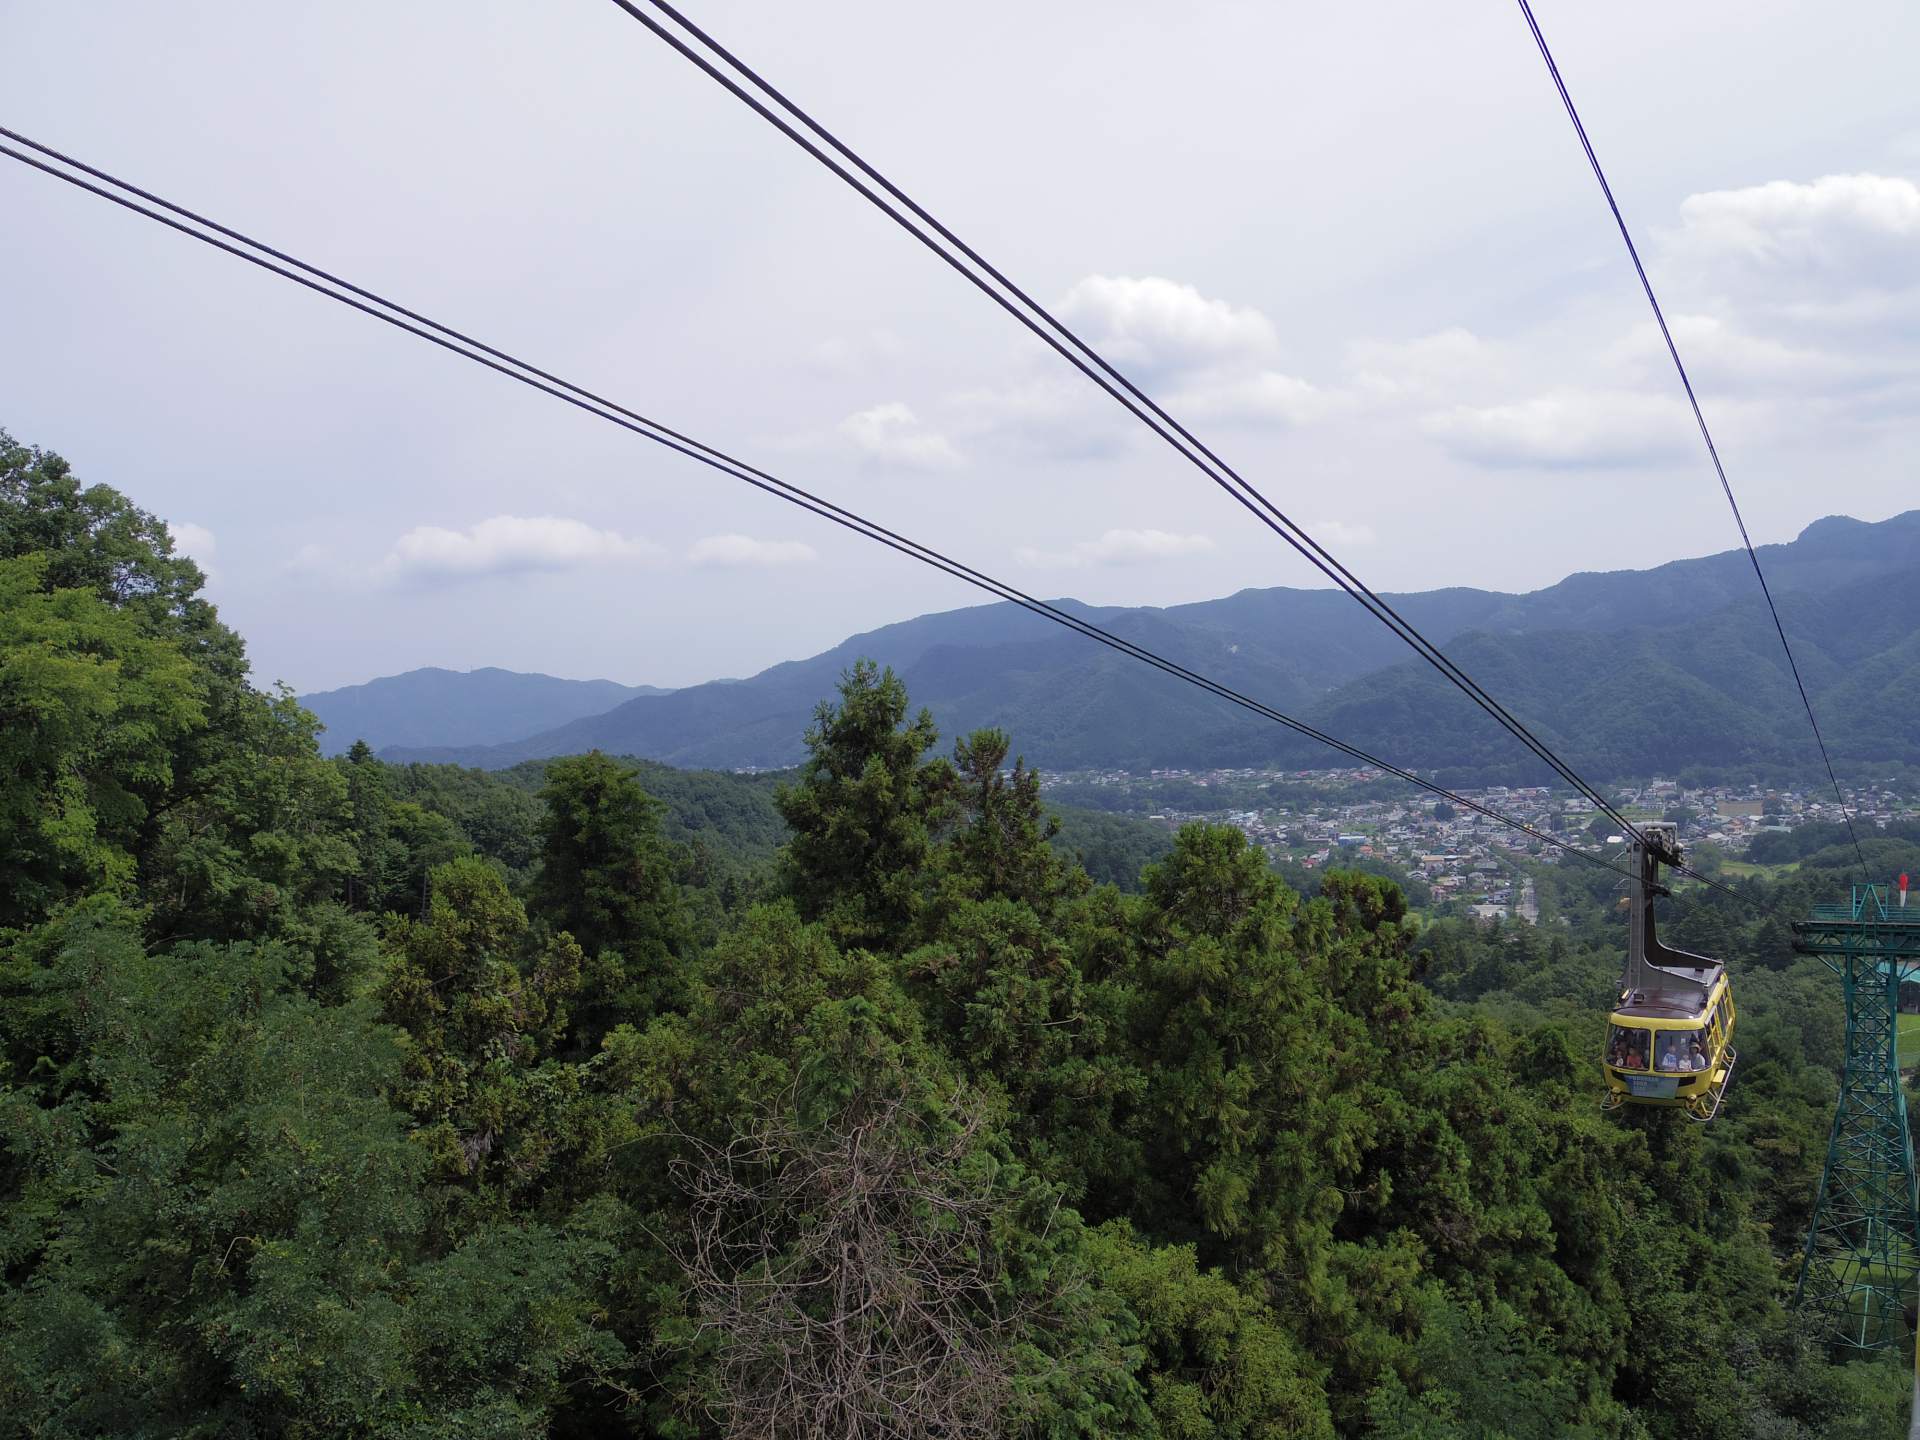 The Hodosan Ropeway offers panoramic views of Nagatoro's nature and townscape.